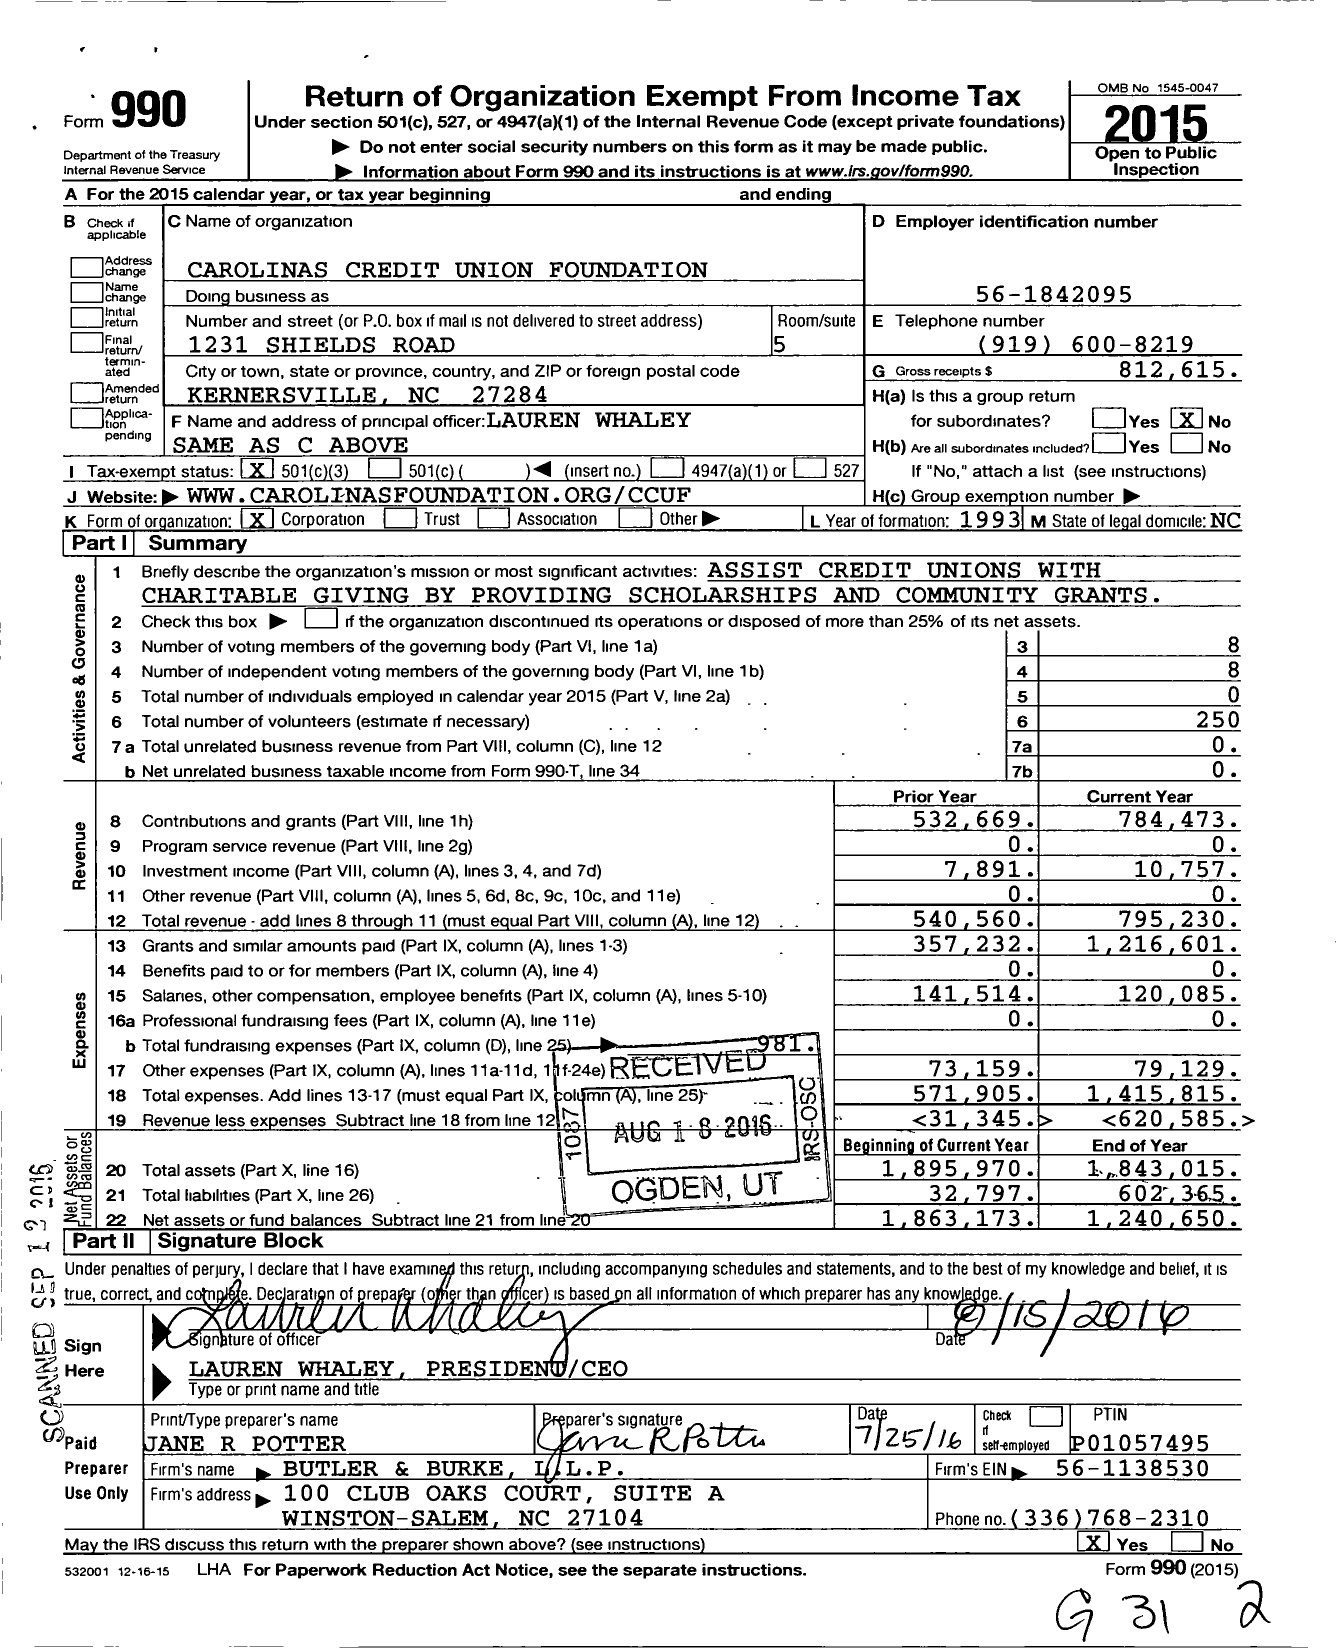 Image of first page of 2015 Form 990 for Carolinas Credit Union Foundation